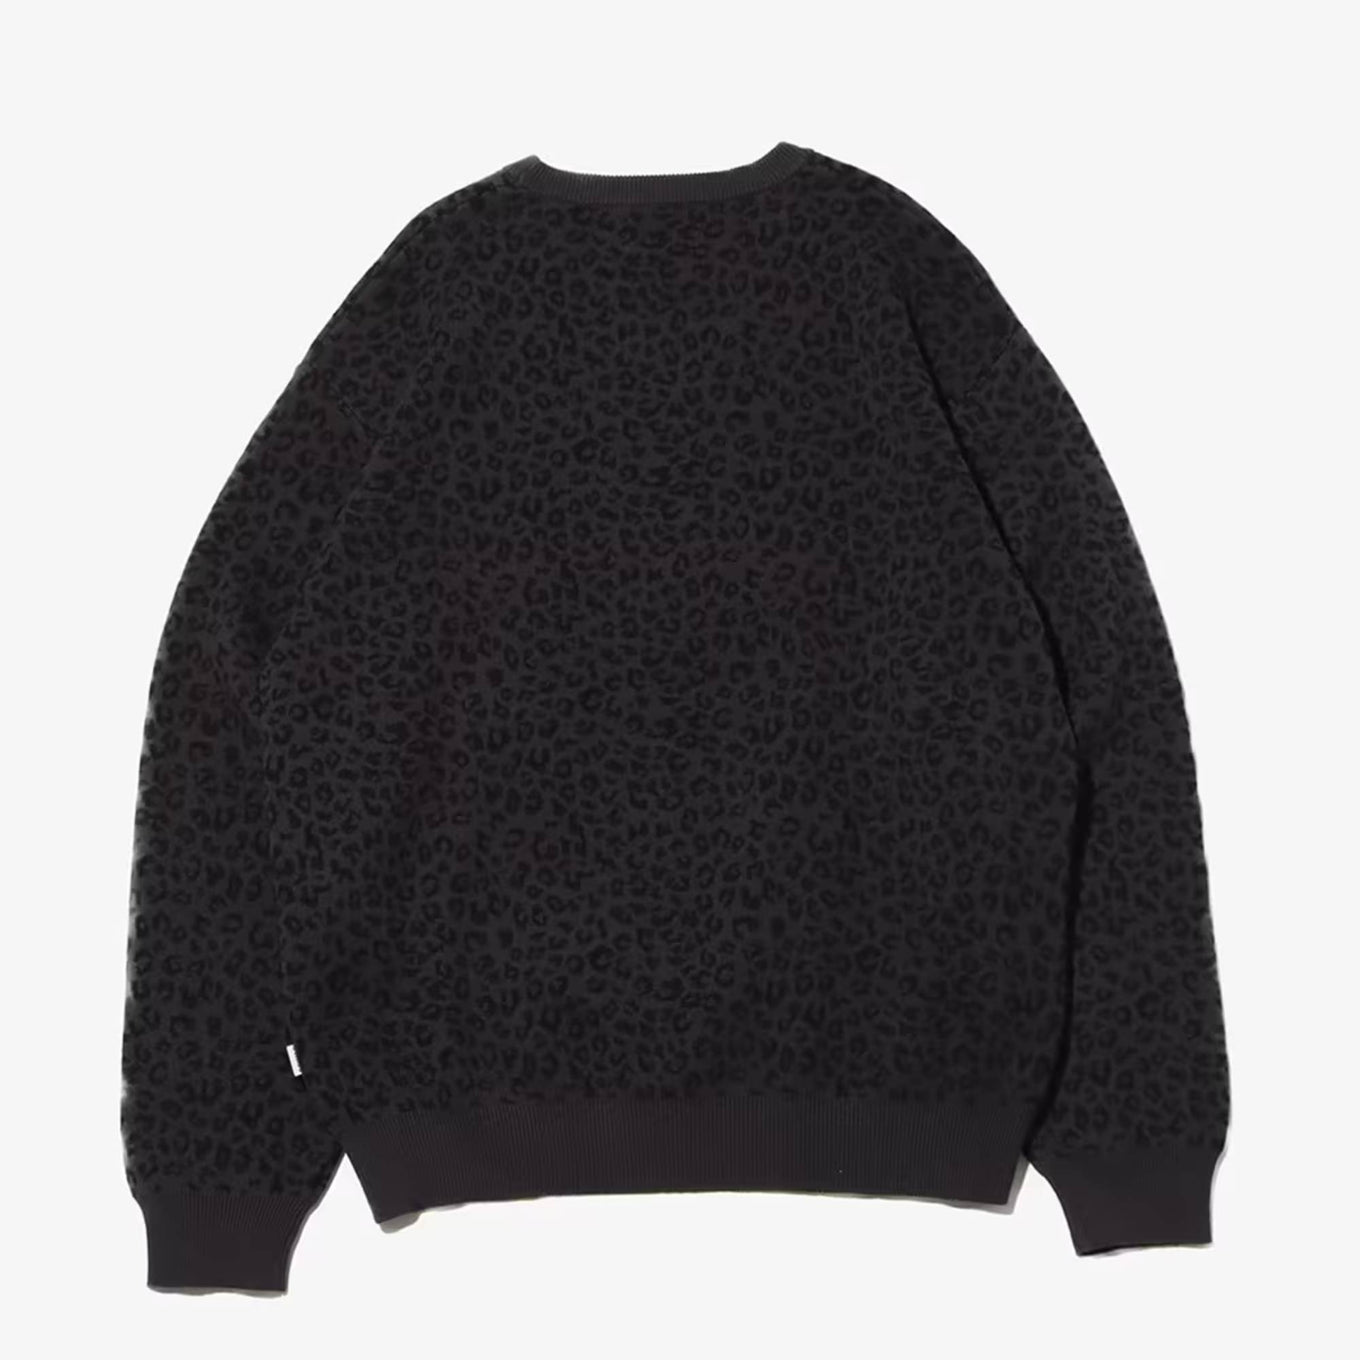 ATMOS EMBROIDERY CLASSIC LOGO KNIT SWEATER